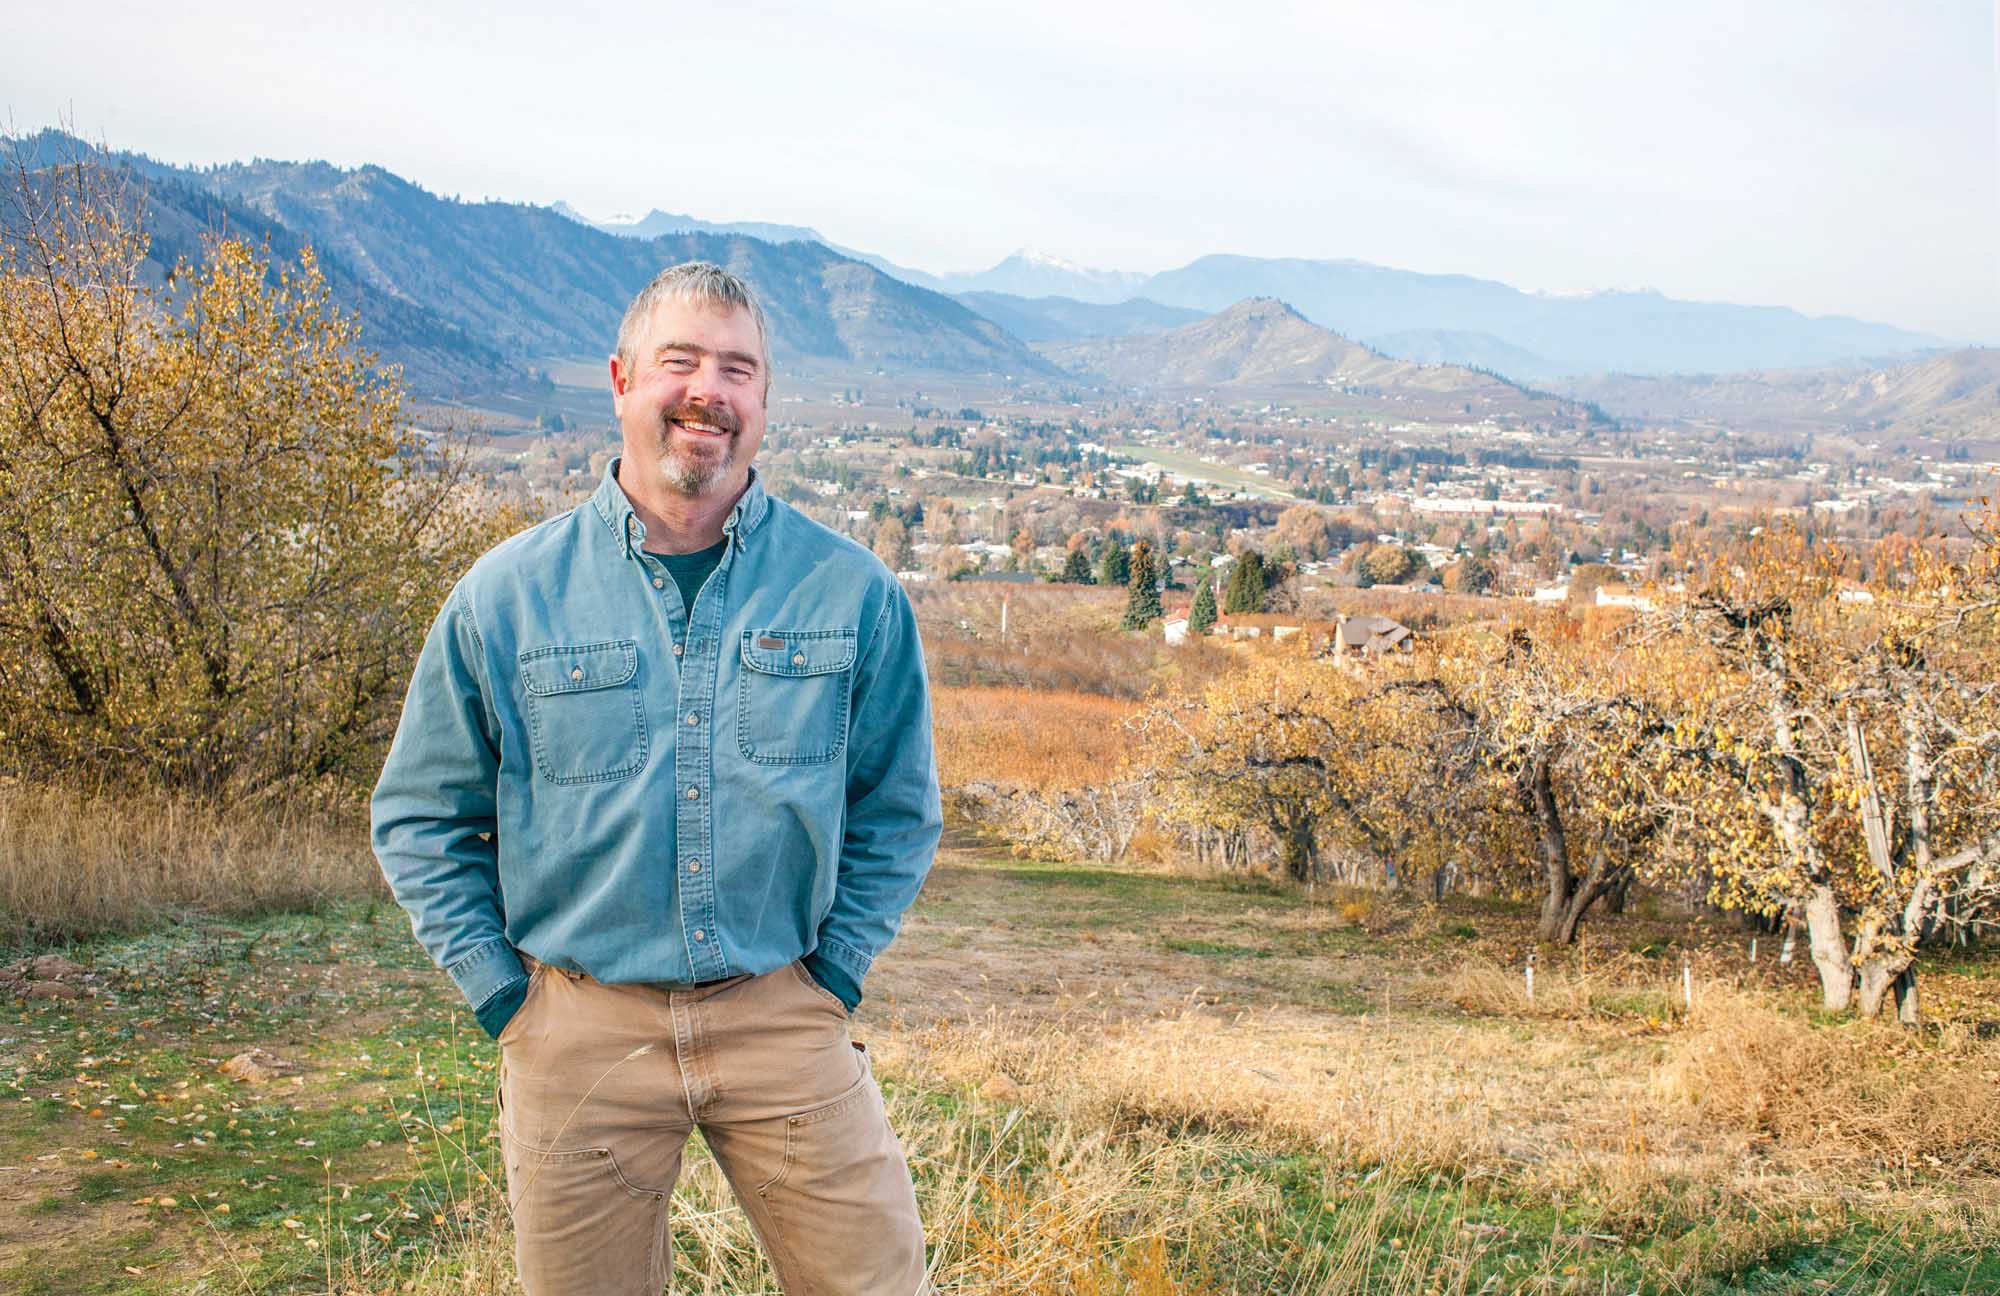 Pear grower, Ray Schmitten overlooking Cashmere, Washington in 2014. Through his childhood, Schmitten would walk this orchard row to get to school at the bottom of the hill in downtown Cashmere. (TJ Mullinax/Good Fruit Grower)